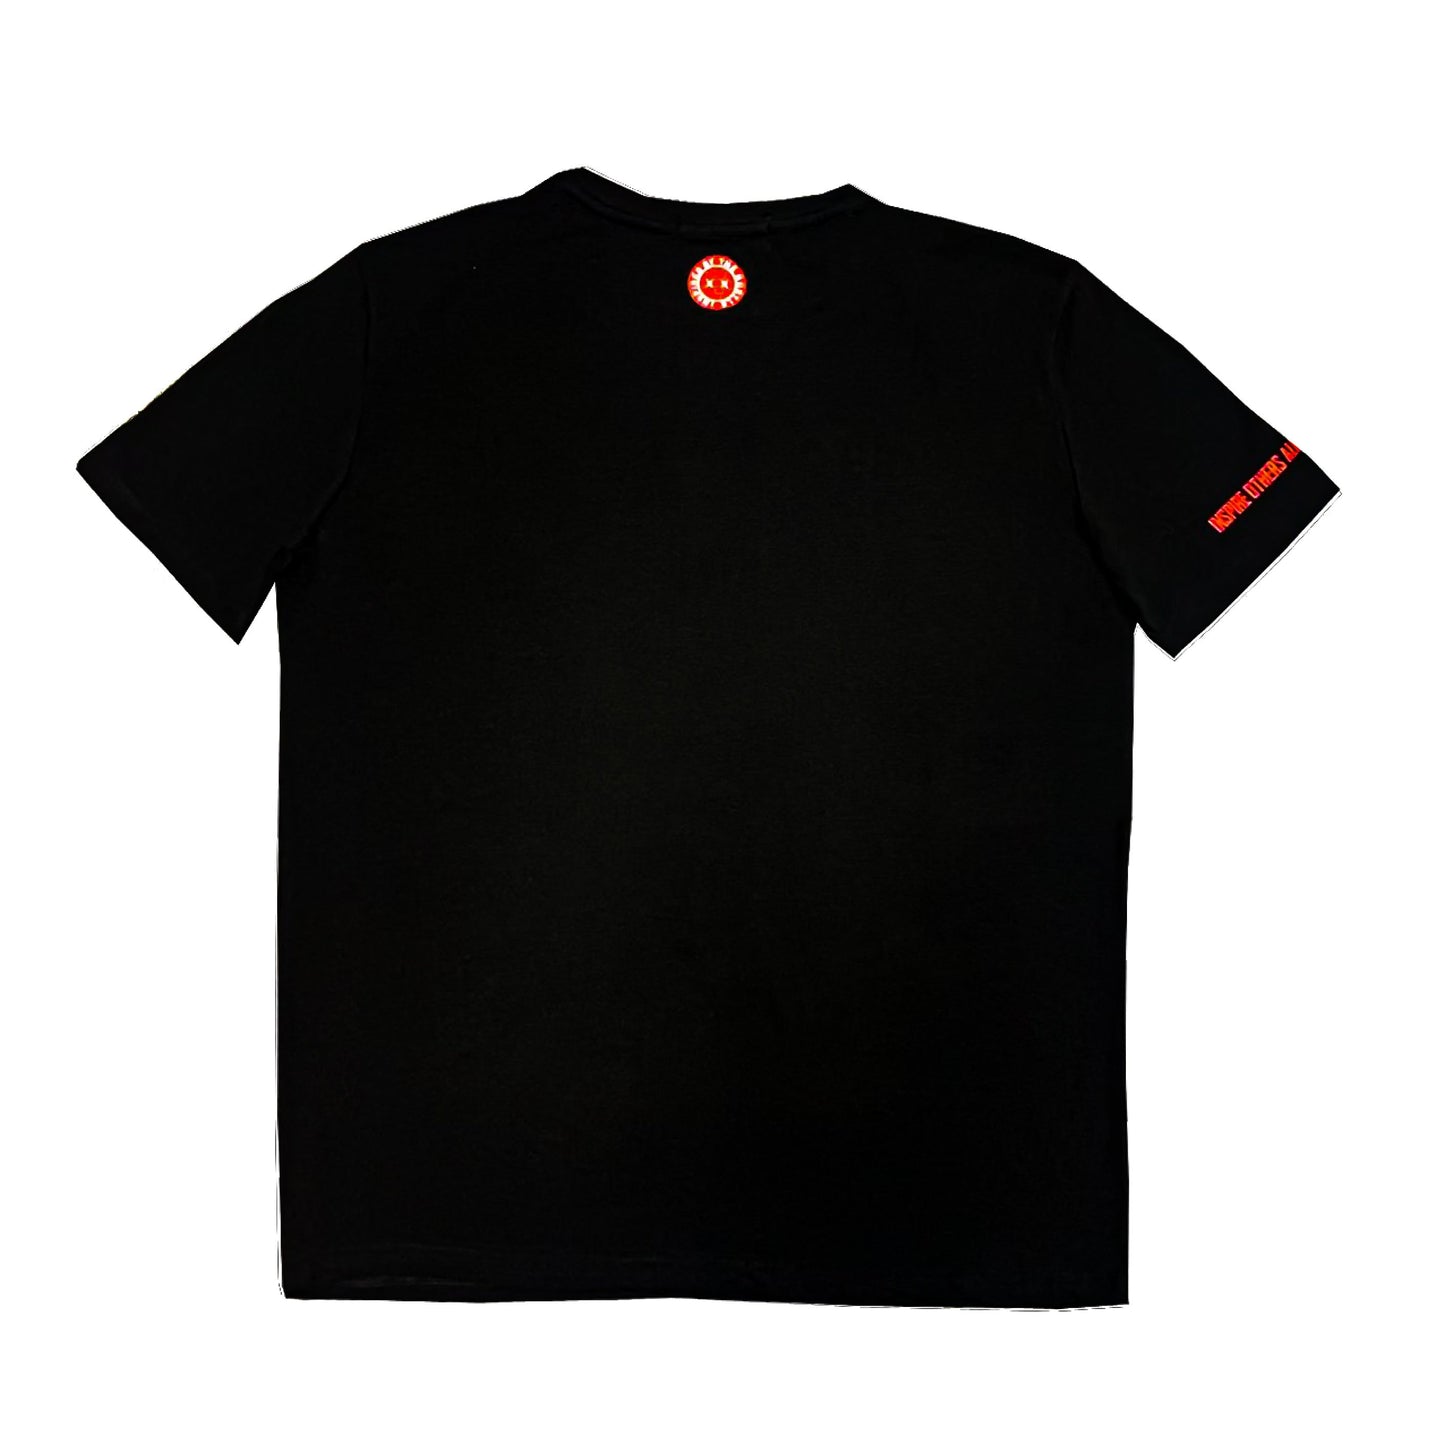 Inspire Others Along The Journey T-Shirt Black/Red/White*